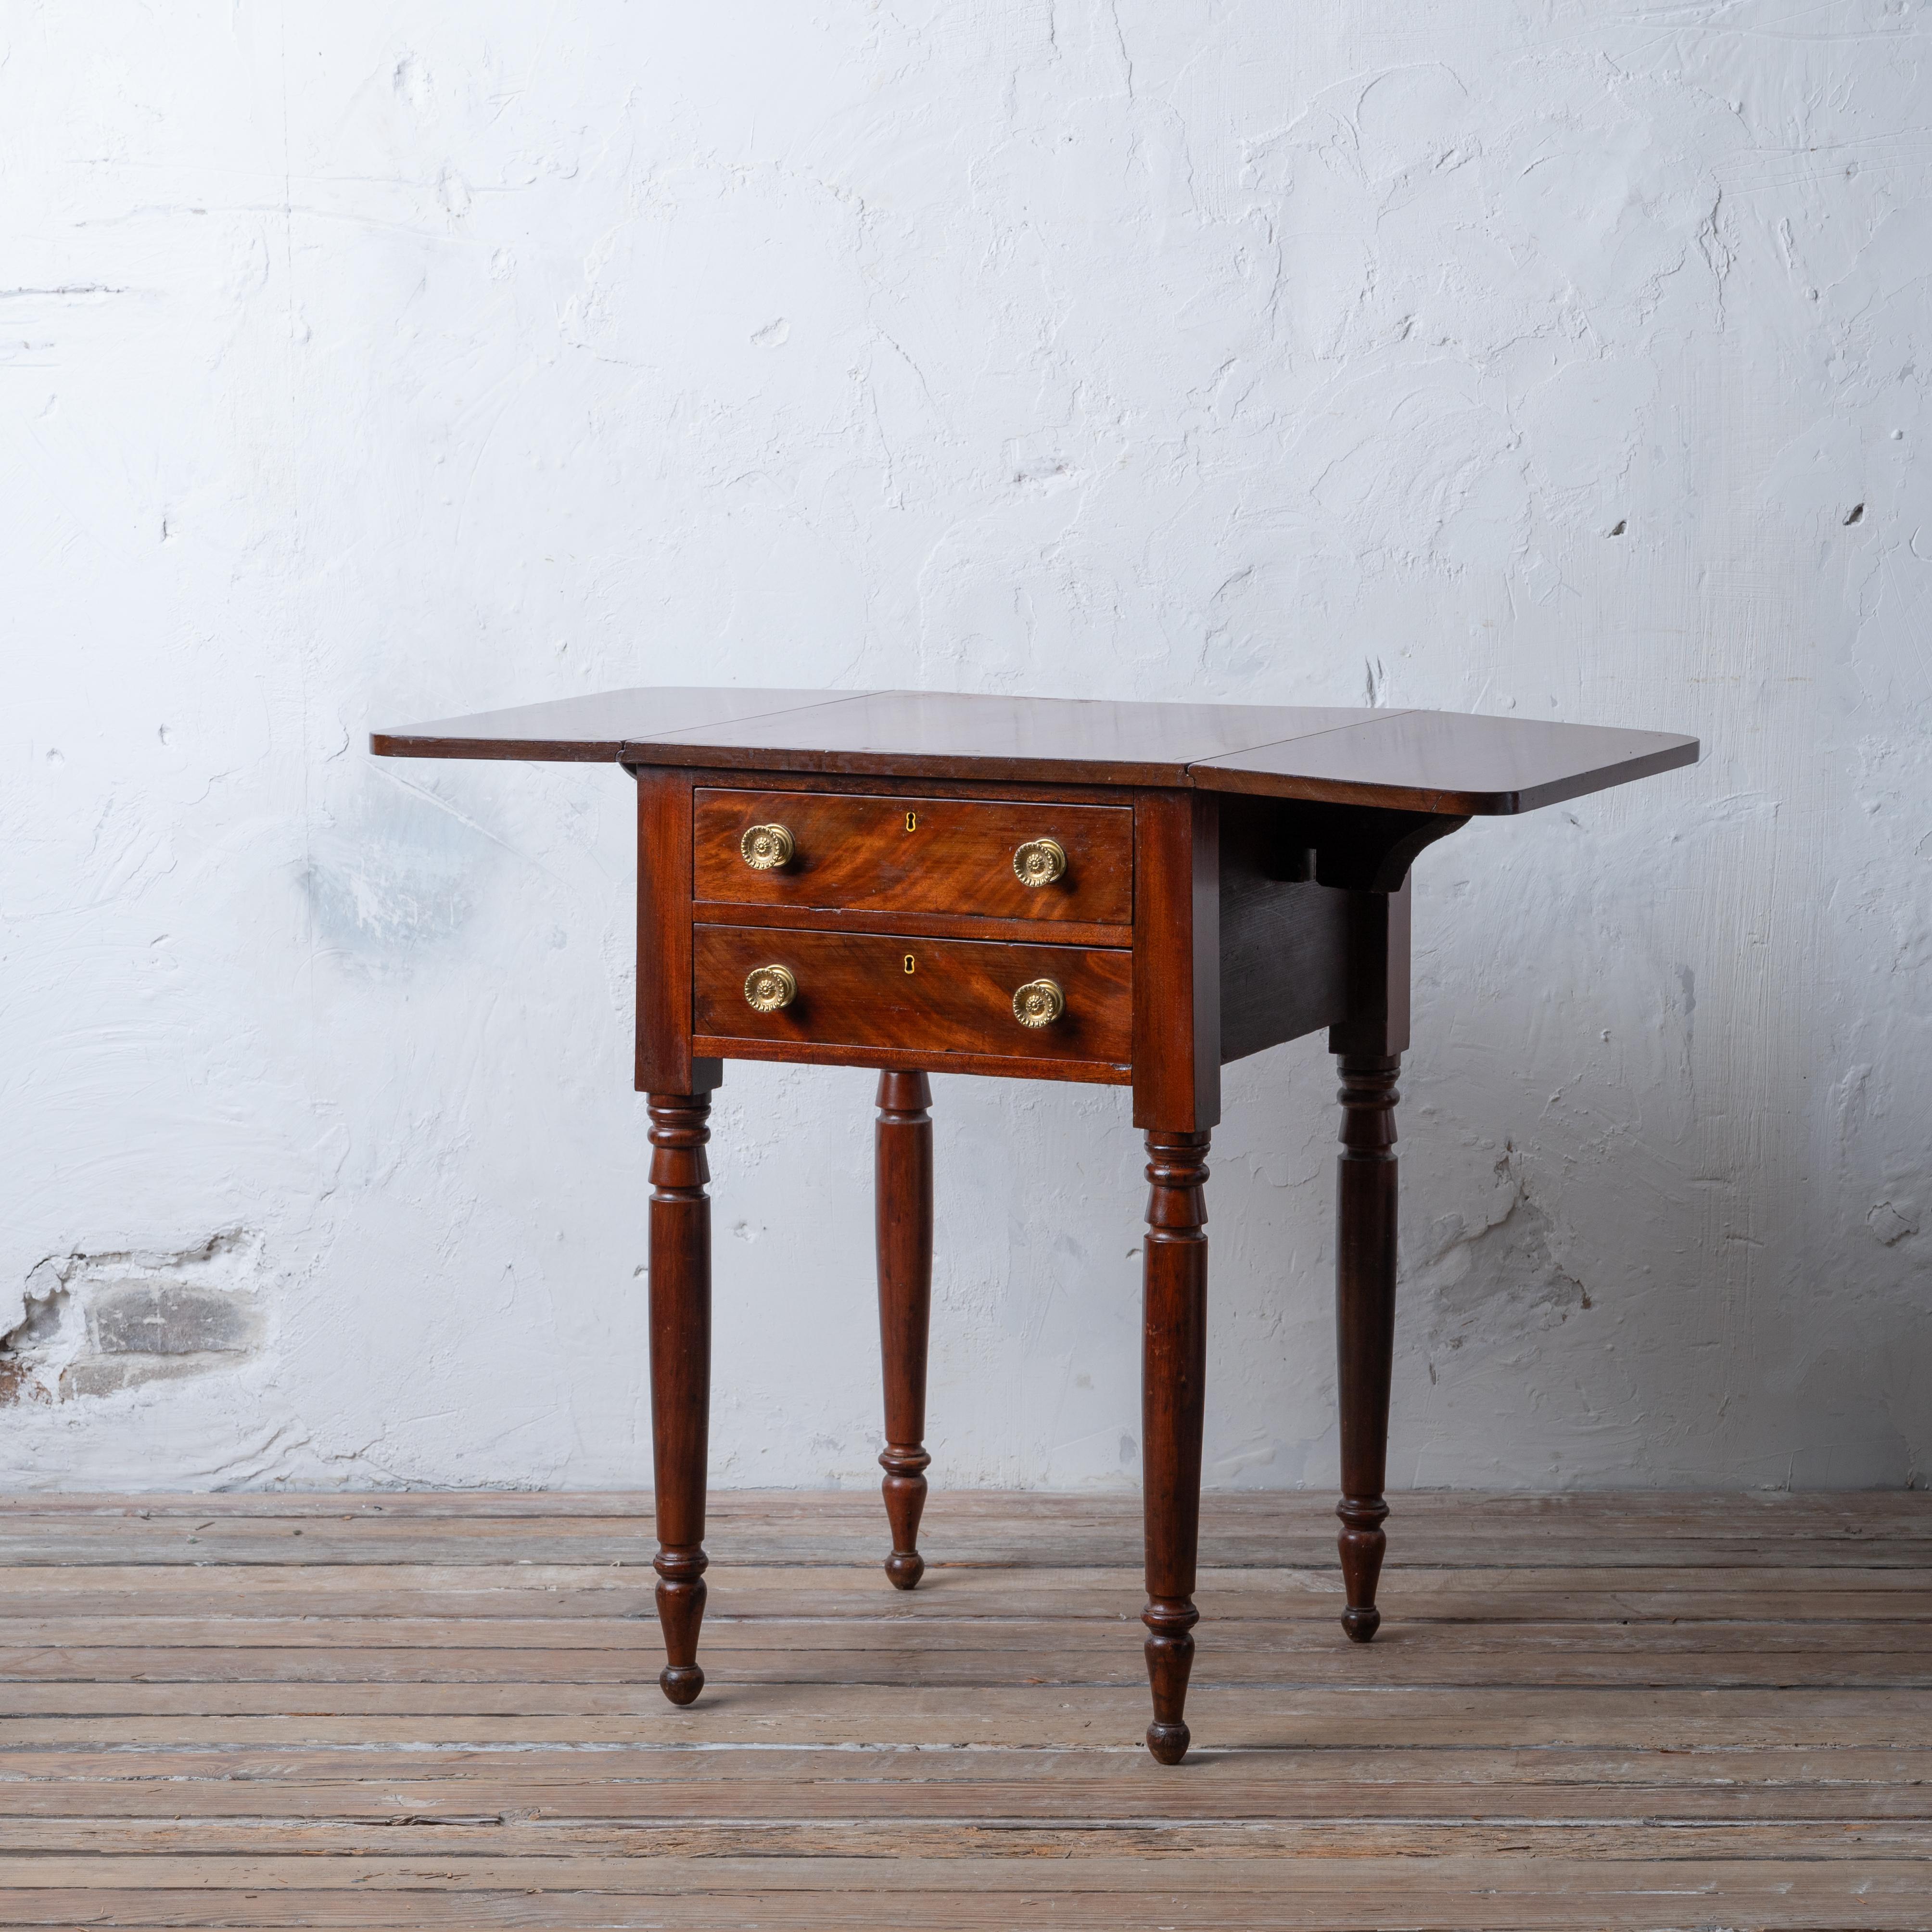 Sheraton Mahogany Drop Leaf Work Table In Good Condition For Sale In Savannah, GA